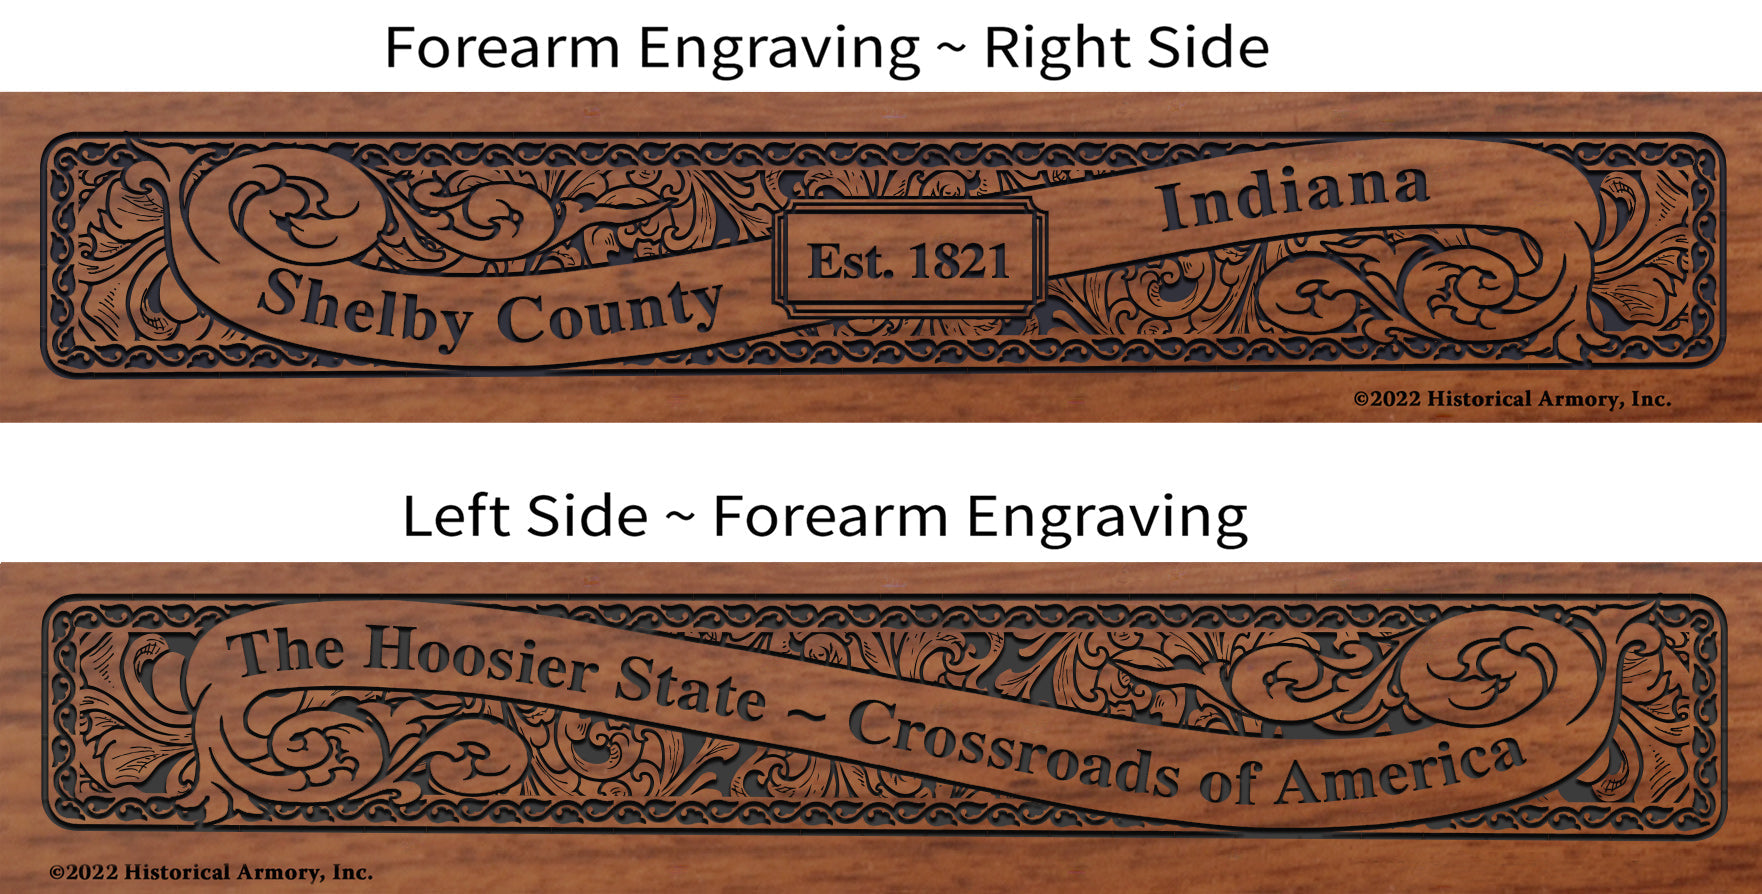 Shelby County Indiana Engraved Rifle Forearm